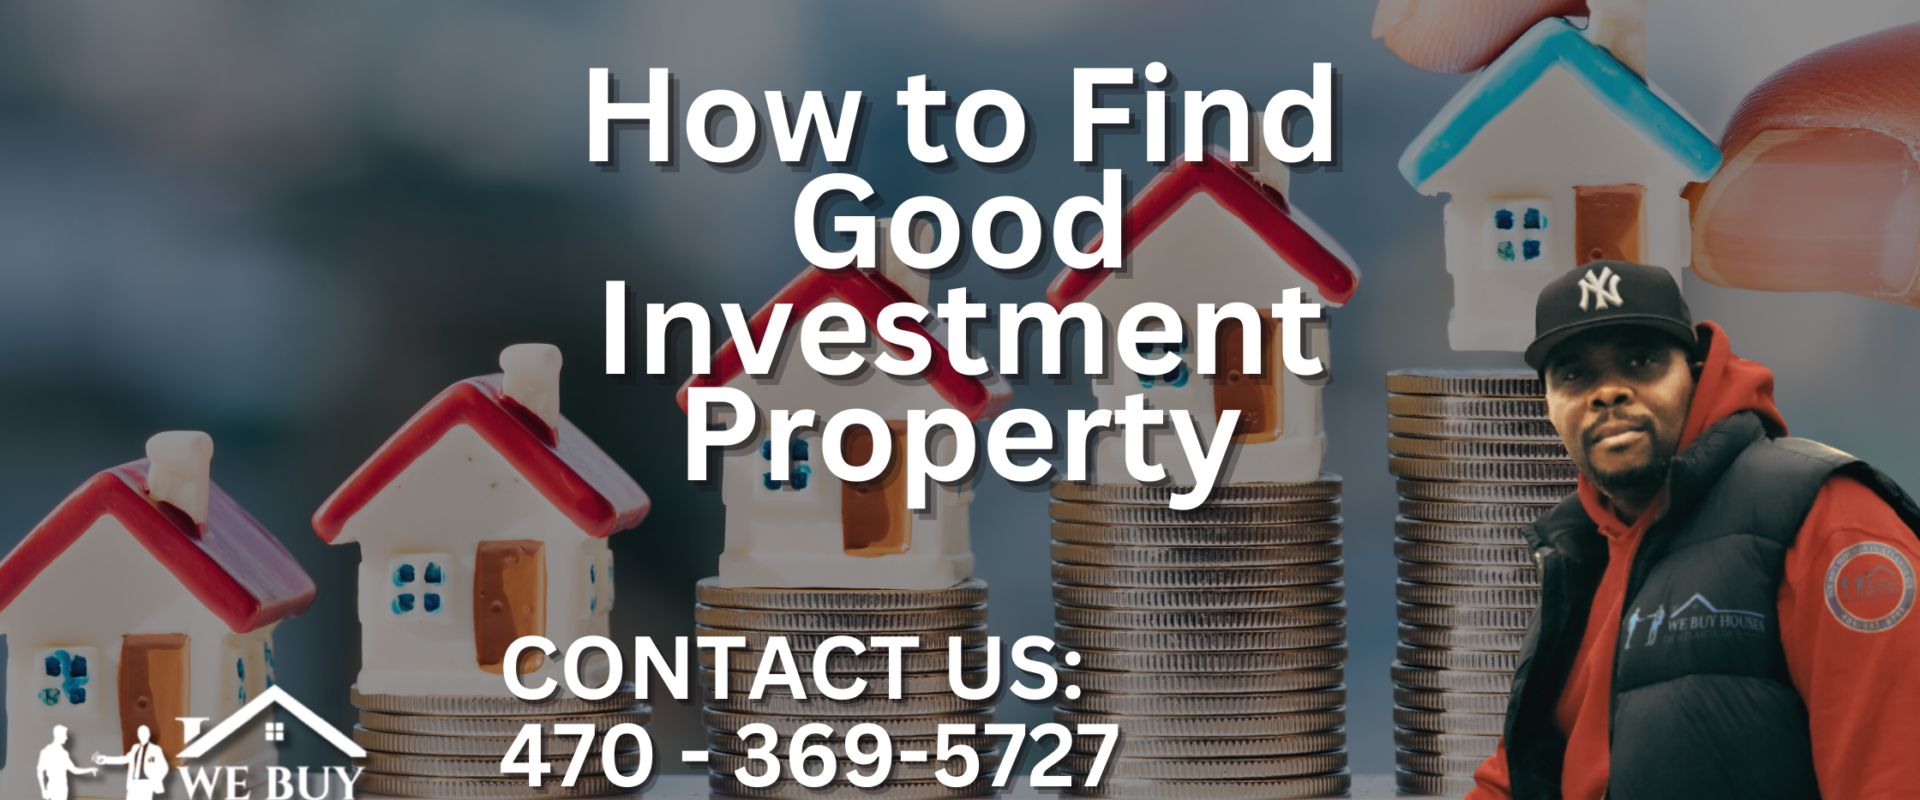 How to Find Good Investment Property